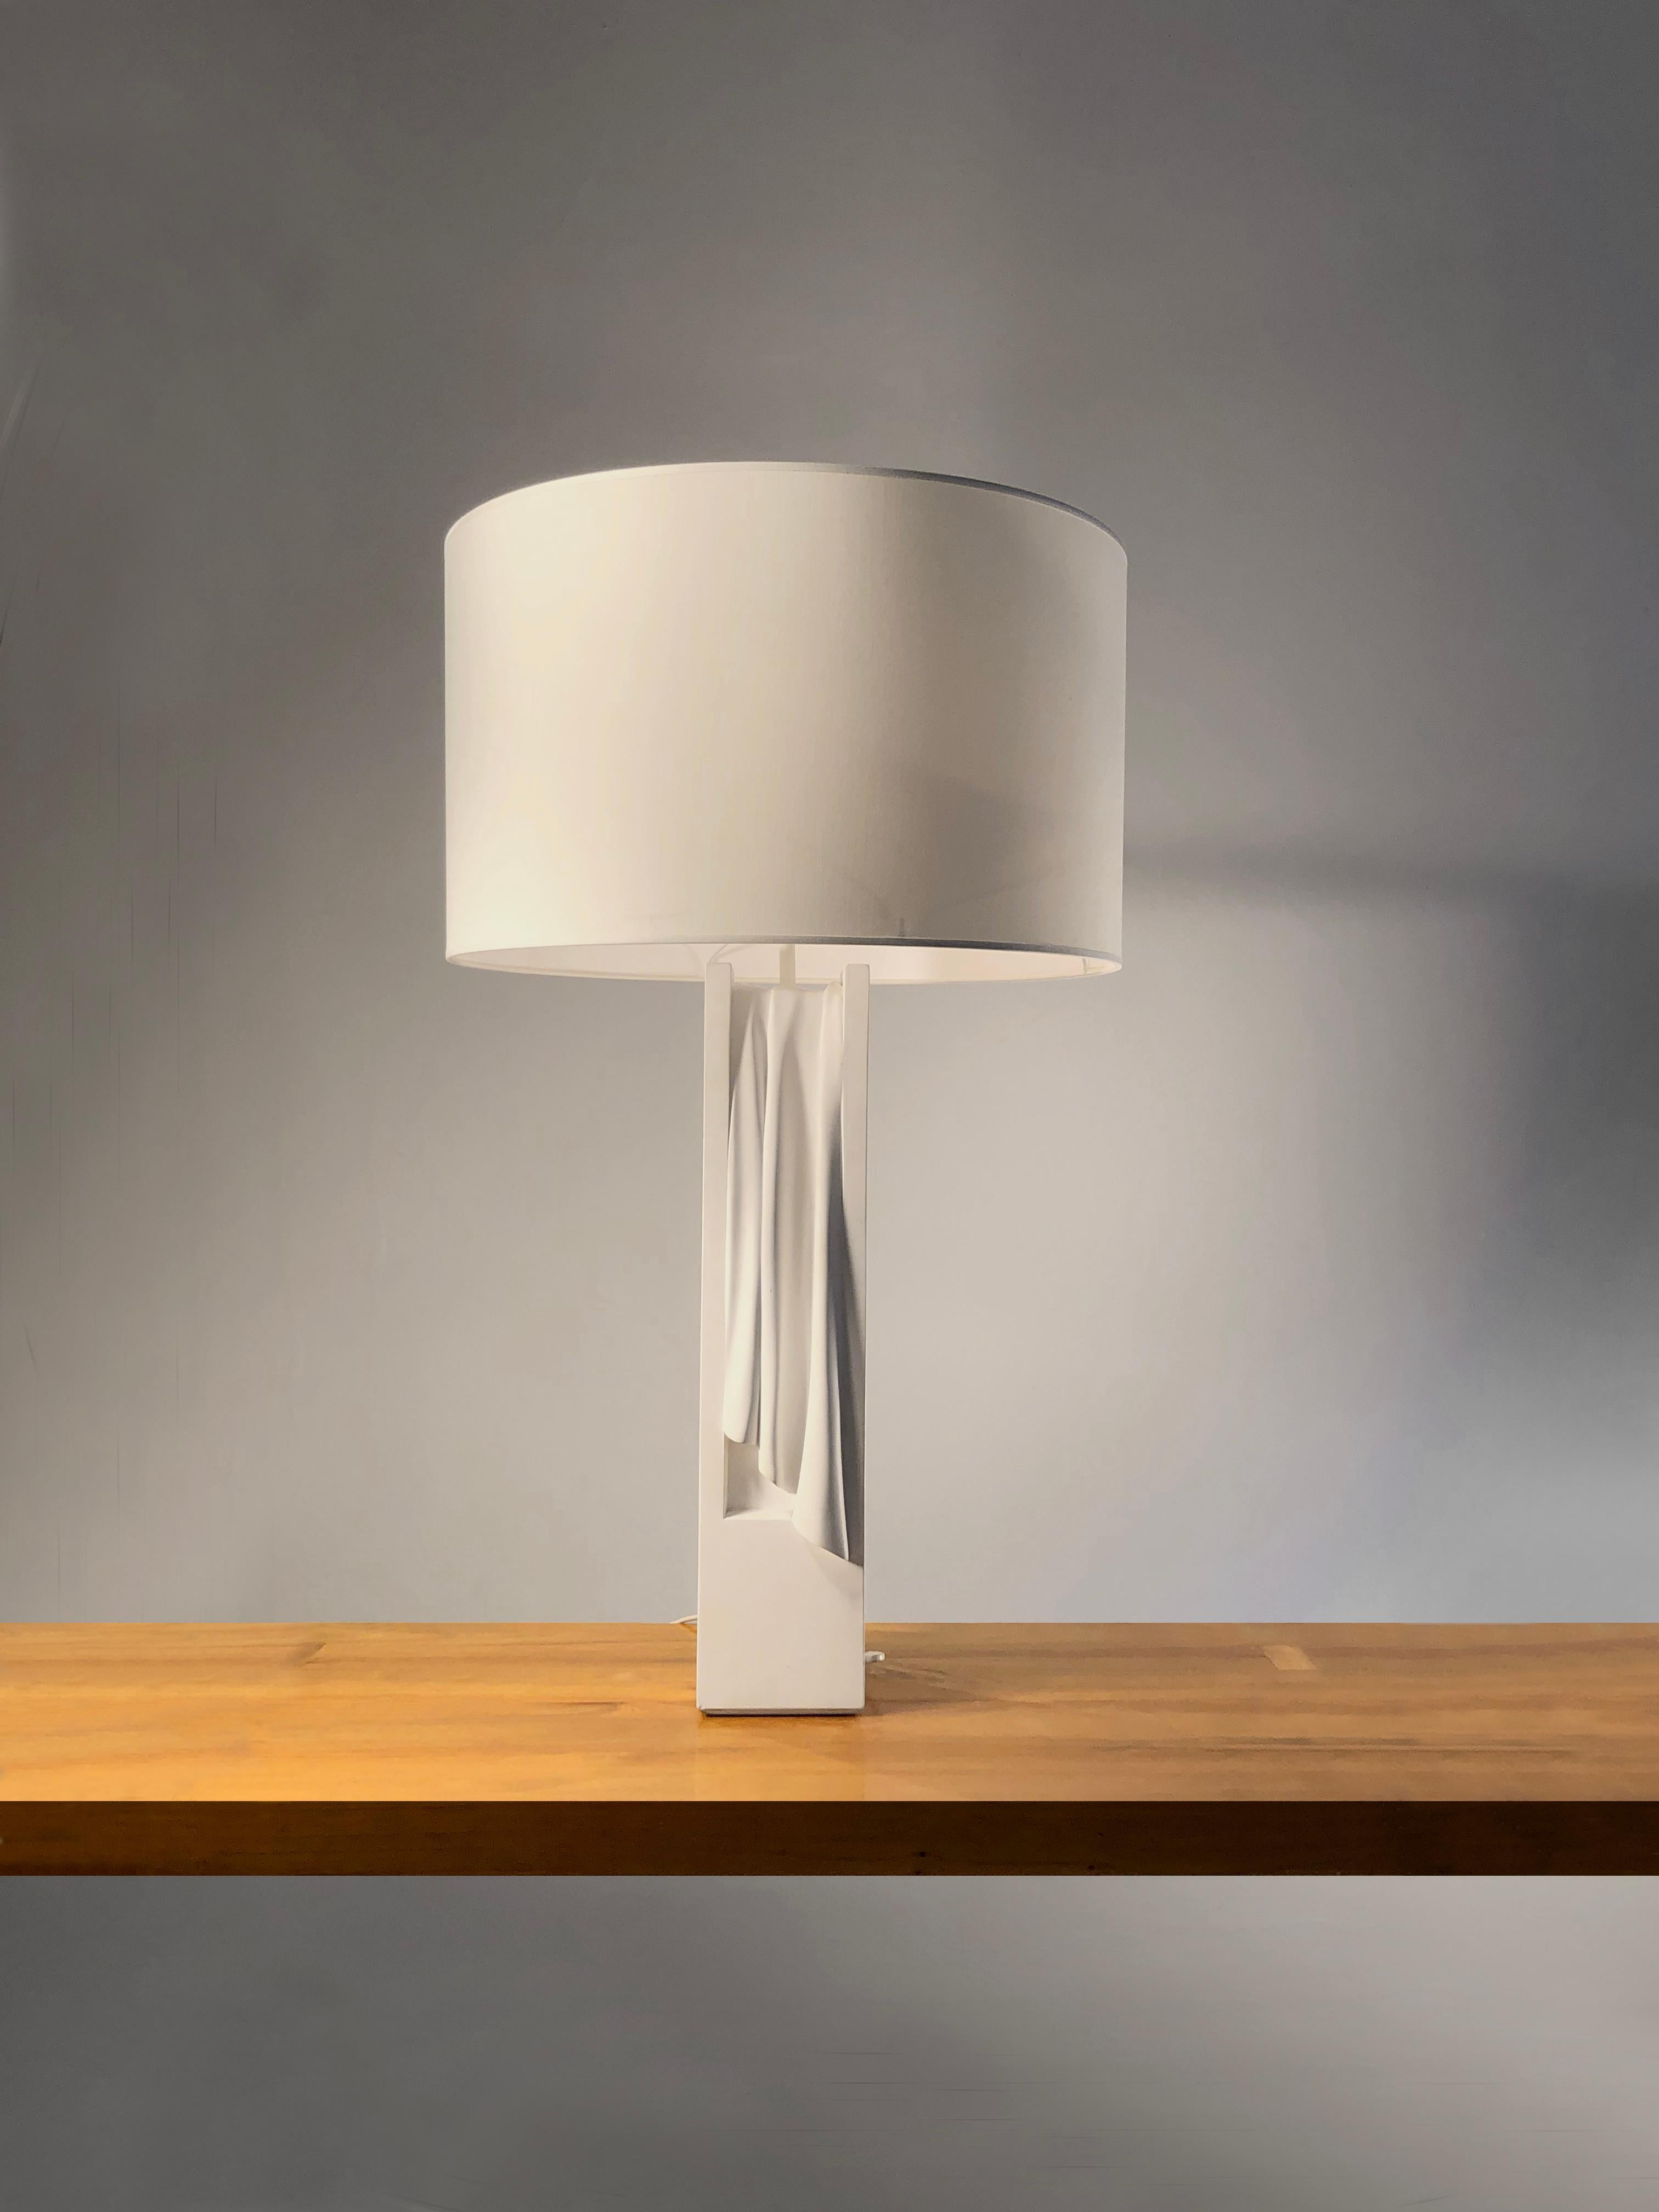 A rare spectacular and important sculptural table lamp, figuring a white curtain sculpted in a rectangular white block of plaster, coming with a minimal cylindrical white shade. This is an iconic model from the french eighties, designed by Loic